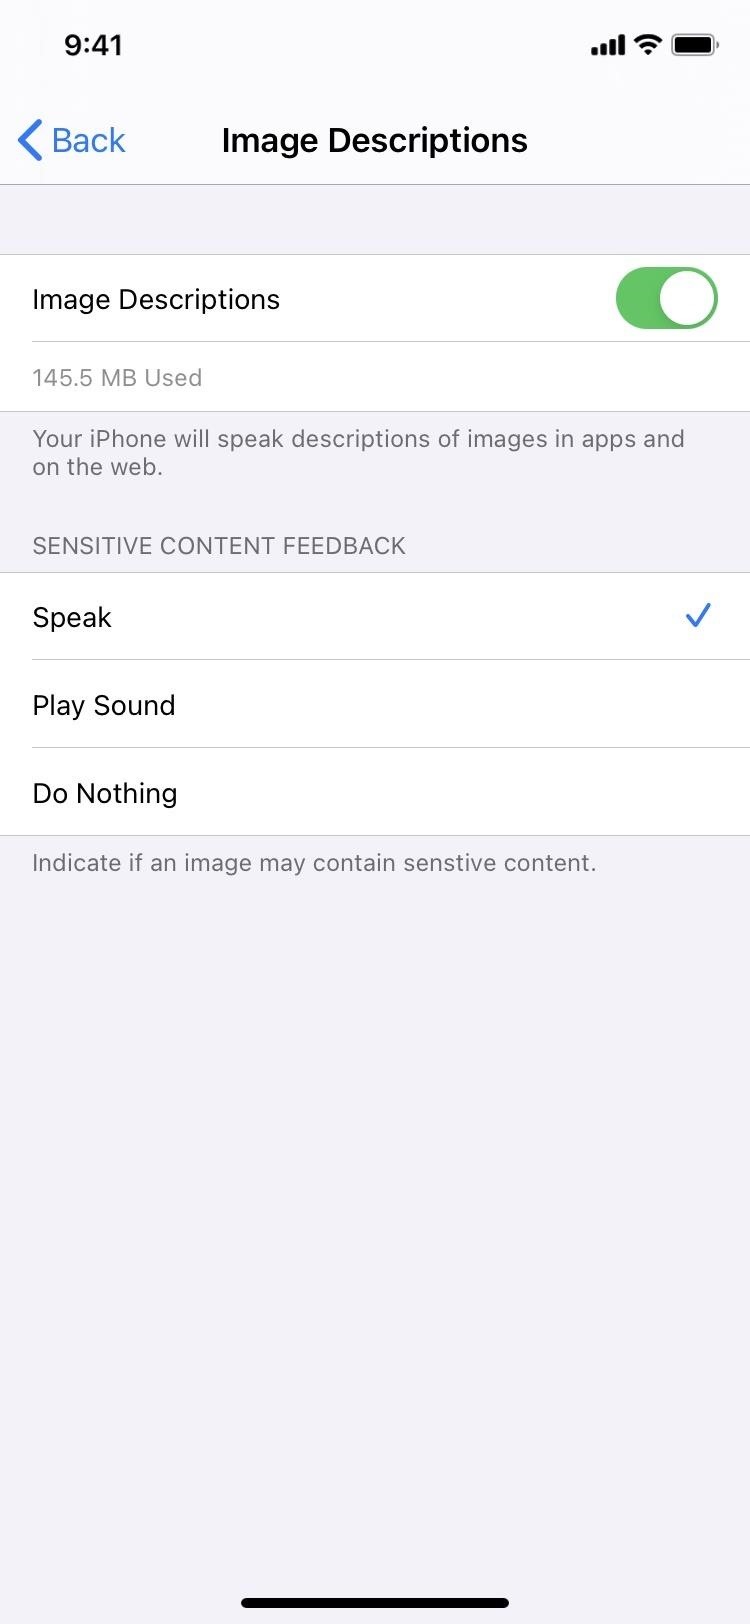 19 New Accessibility Features in iOS 14 That Every iPhone User Can Benefit From